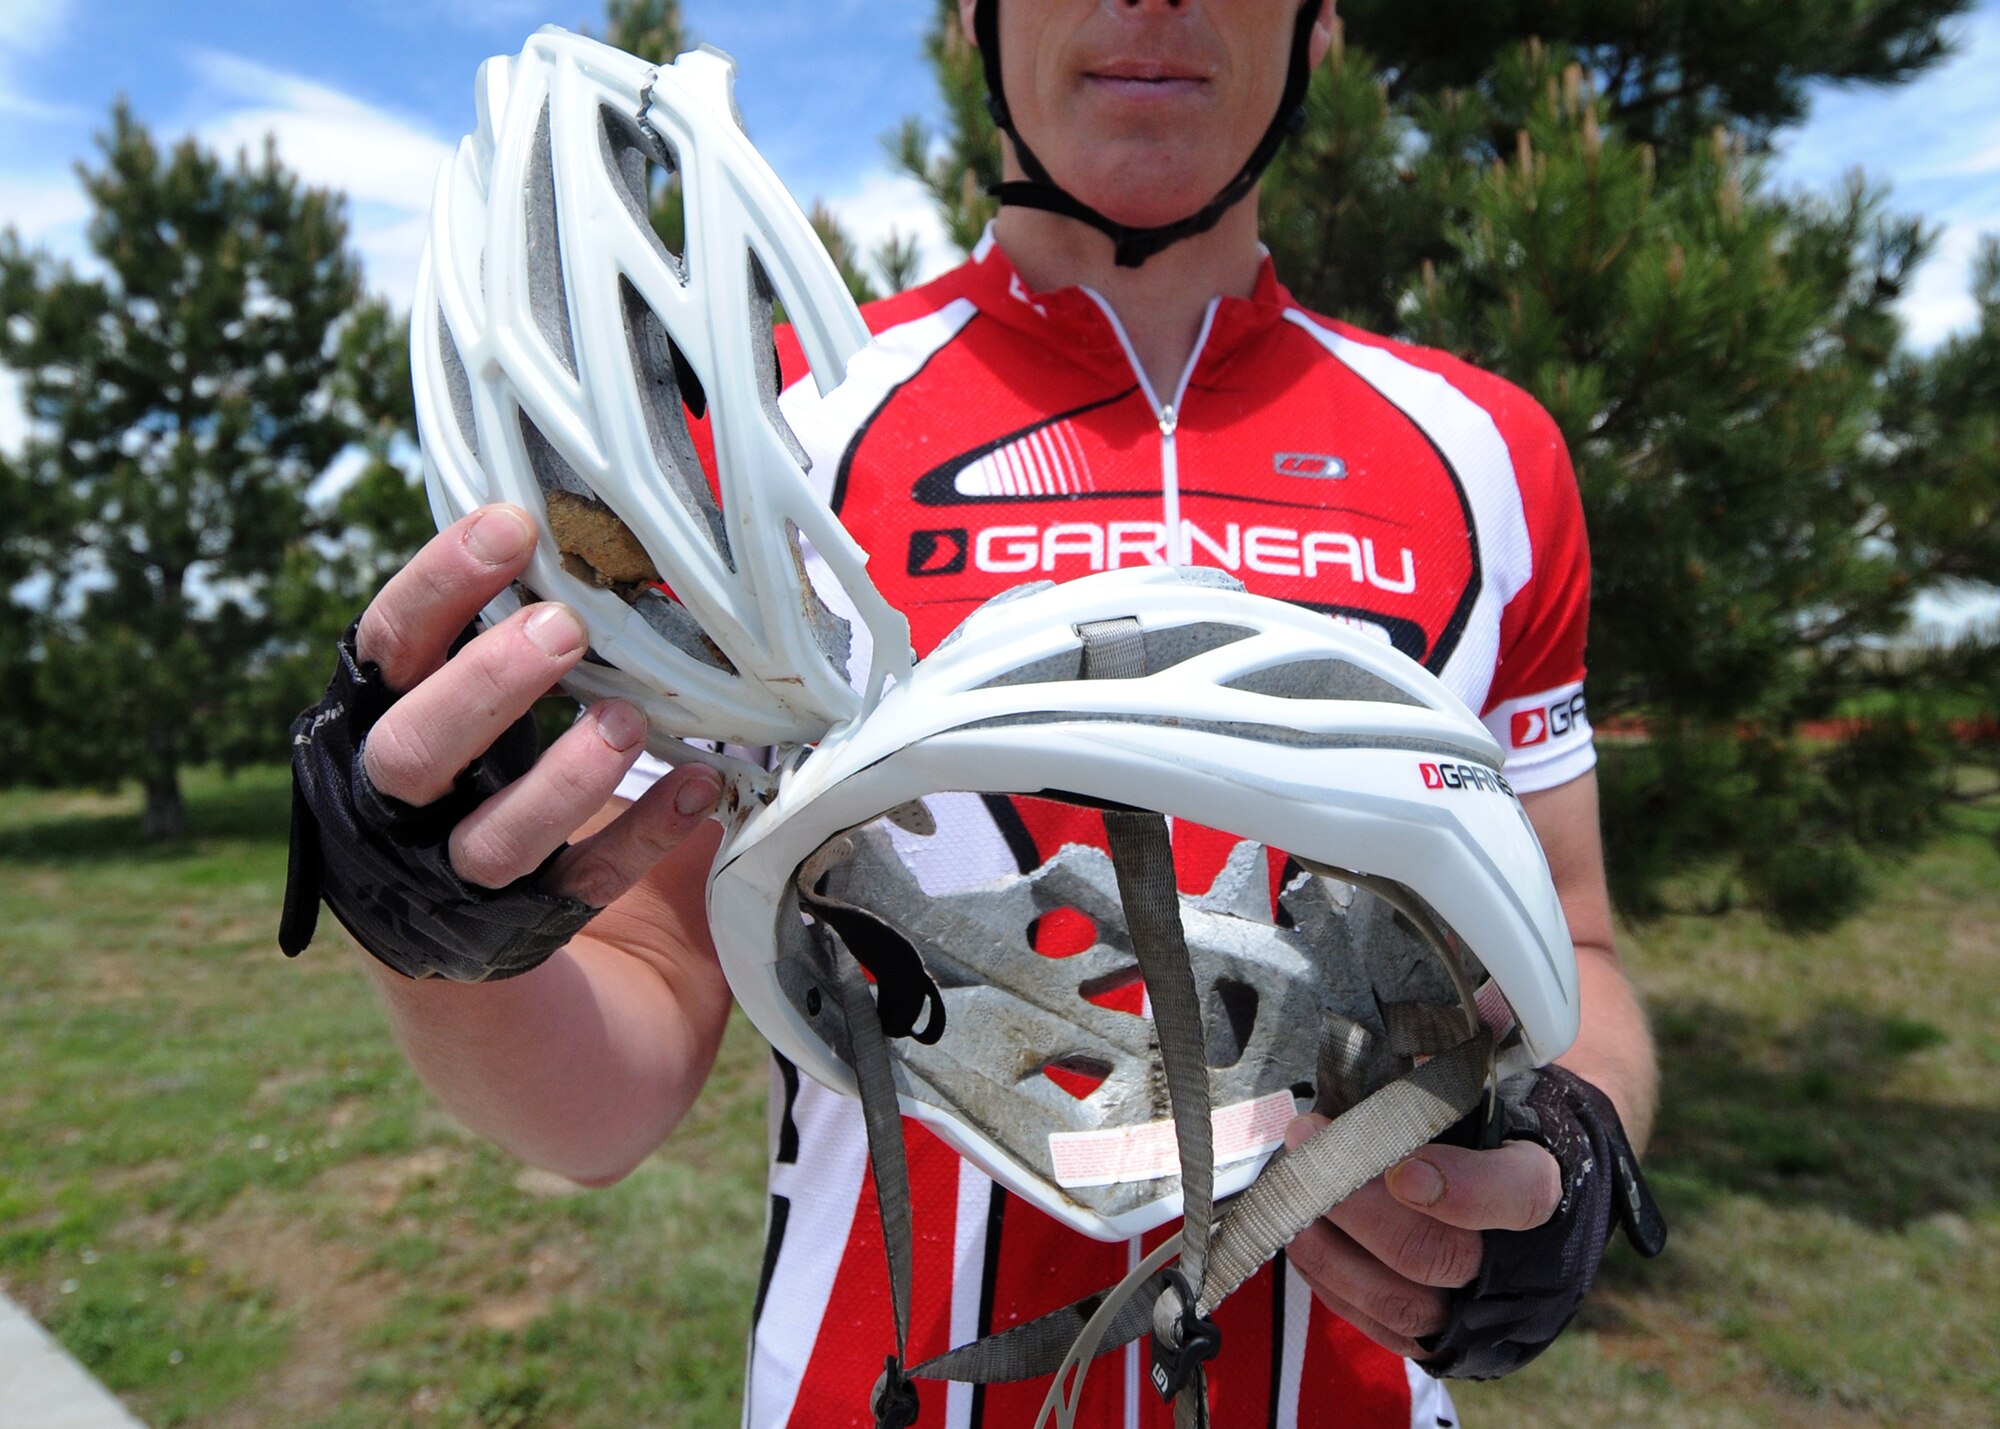 Before a bike ride May 28, 2015, Derek Hamby, the 50th Space Wing Manpower and Organization chief at Schriever Air Force Base, Colo., shows off the helmet he was wearing during a serious bicycle accident in November 2014. Although his injuries were severe, Hamby’s helmet saved his life. (U.S. Air Force photo/Staff Sgt. Debbie Lockhart)